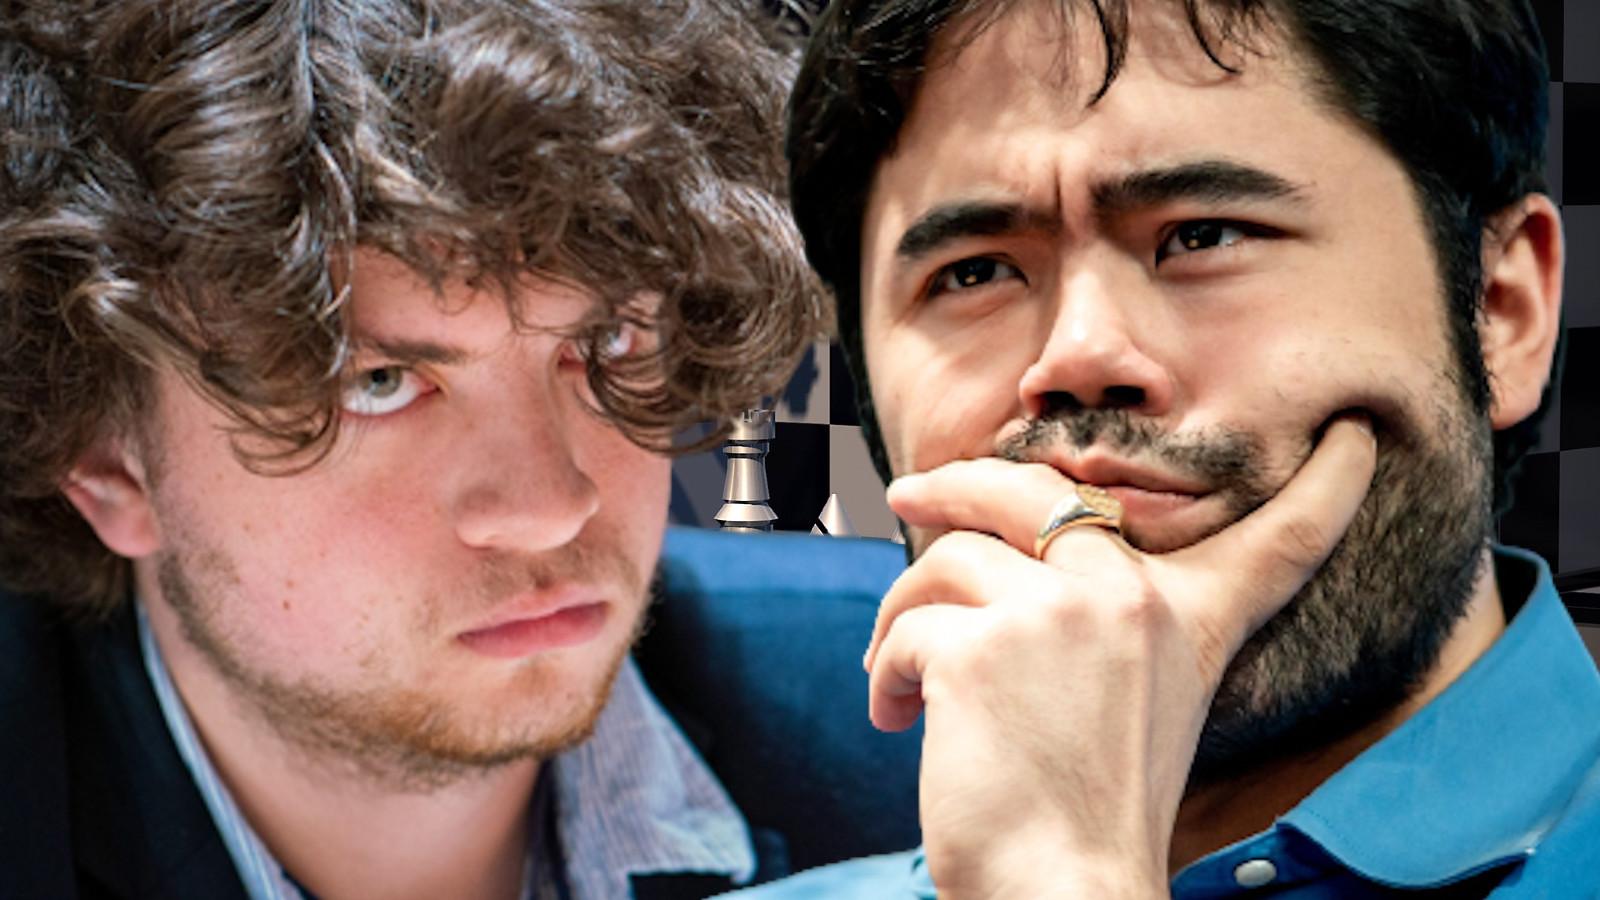 Hikaru Nakamura is now accusing a chess prodigy of cheating